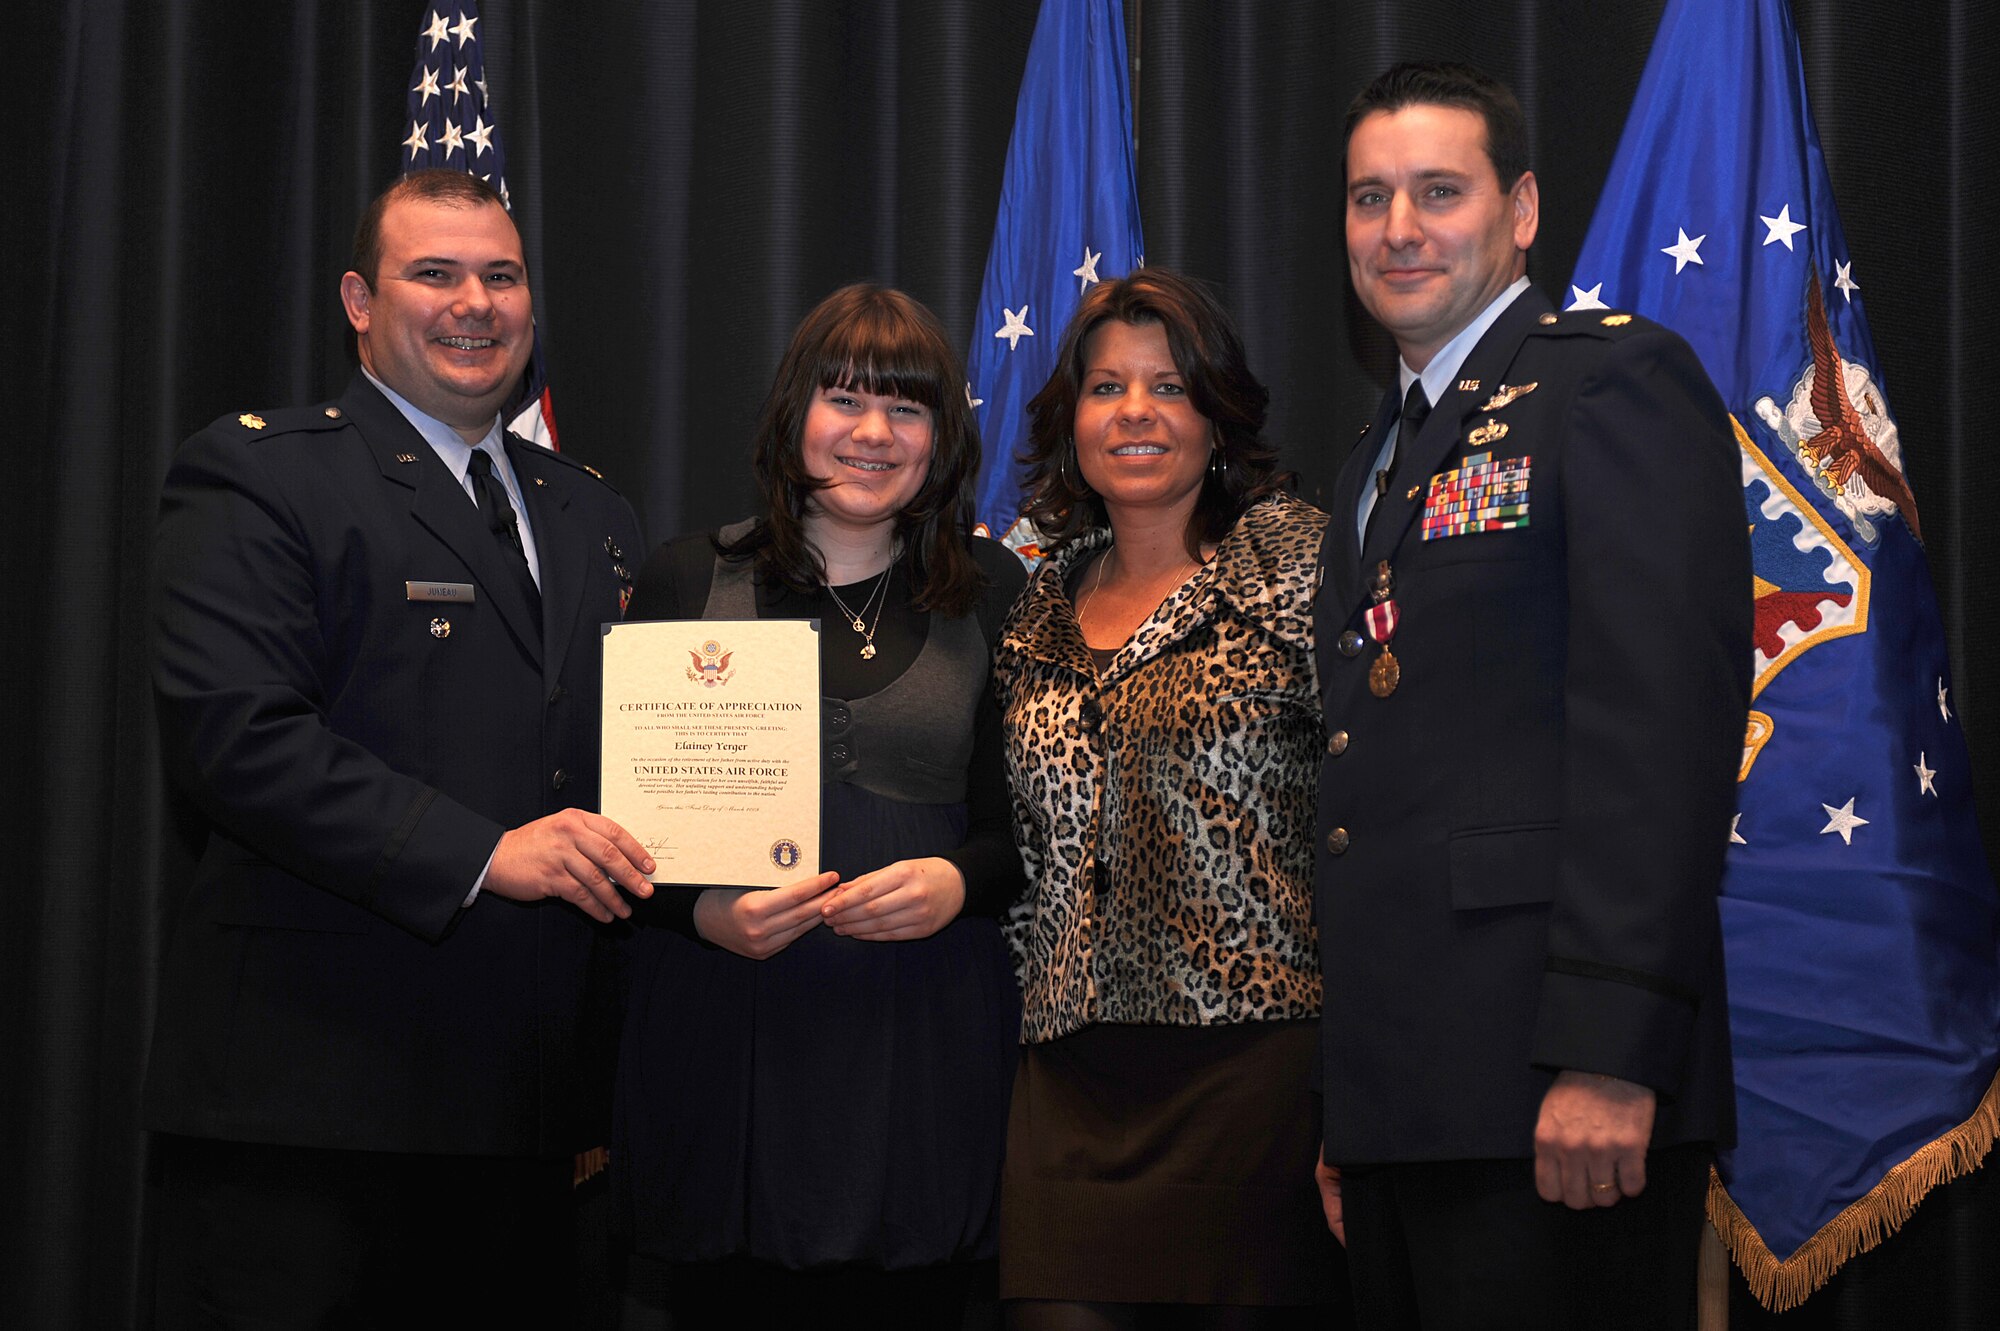 Maj. Craig Juneau, from  Scott Air Force Base, Ill., presents a certificate of appreciation to Elainey, daughter of Theresa and Maj. John M. Yerger during Major Yerger's retirement ceremony in the U.S. Air Force Expeditionary Center on Fort Dix, N.J., Jan. 9, 2009.  Major Yerger was the assistant chief, logistics and resources for the Center's Expeditionary Operations School.  Prior to this position, Major Yerger served for four years in the Air Mobility Battlelab as a project manager and the chief of finance and program support.  Major Yerger's retirement is effective March 1.  (U.S. Air Force Photo/Staff Sgt. Nathan Bevier)